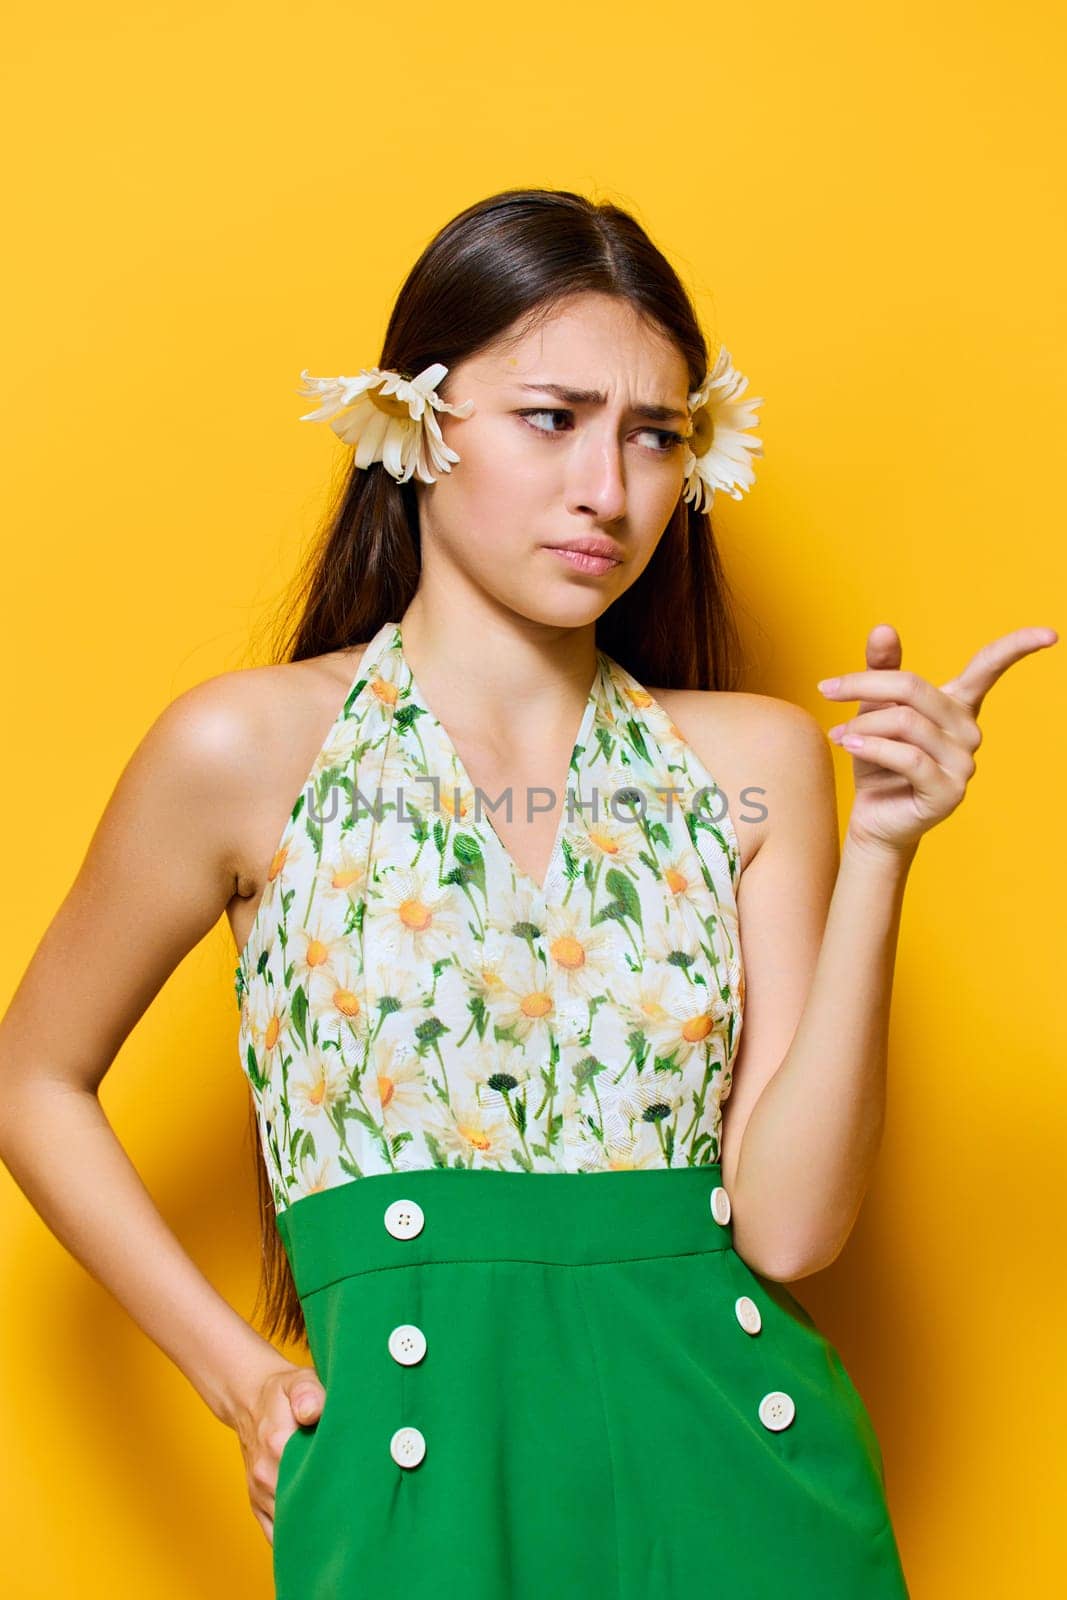 brunet woman style flower background fashion stylish trend yellow happy young charming camomile attractive beautiful happiness portrait pretty person lady cute